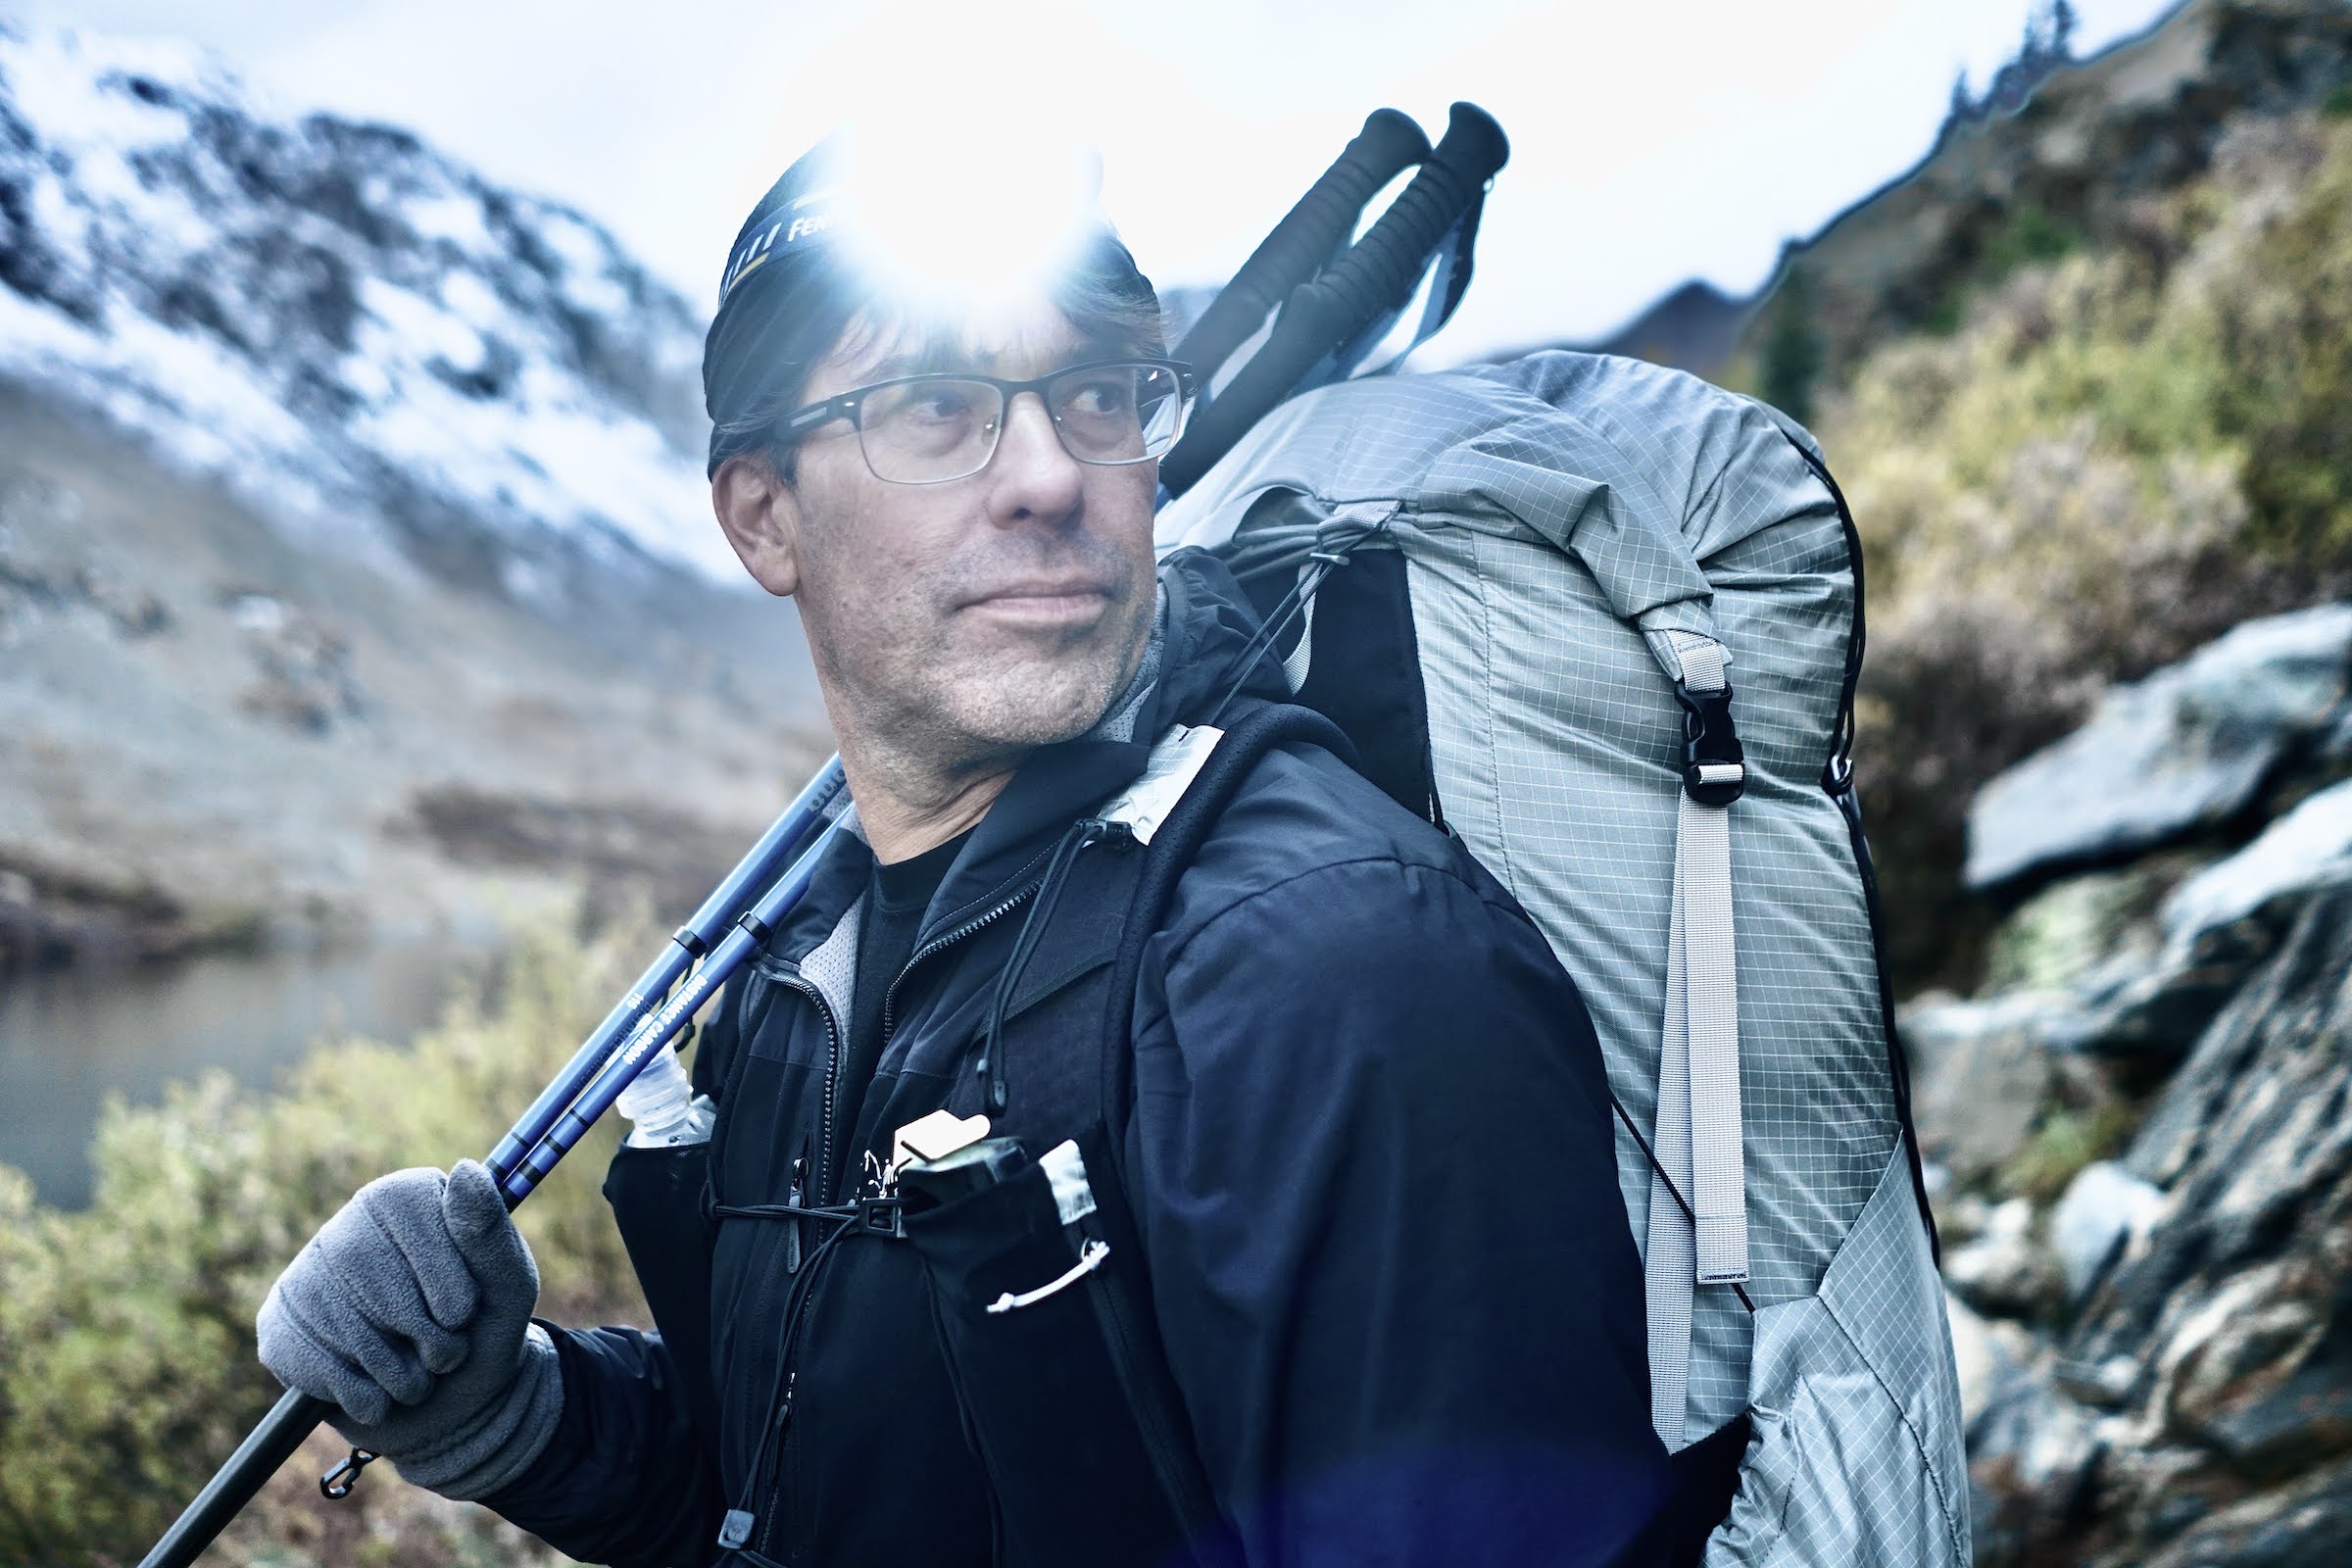 Gale VS: Ultralight + Packable Jacket For Any Adventures by Seadon —  Kickstarter